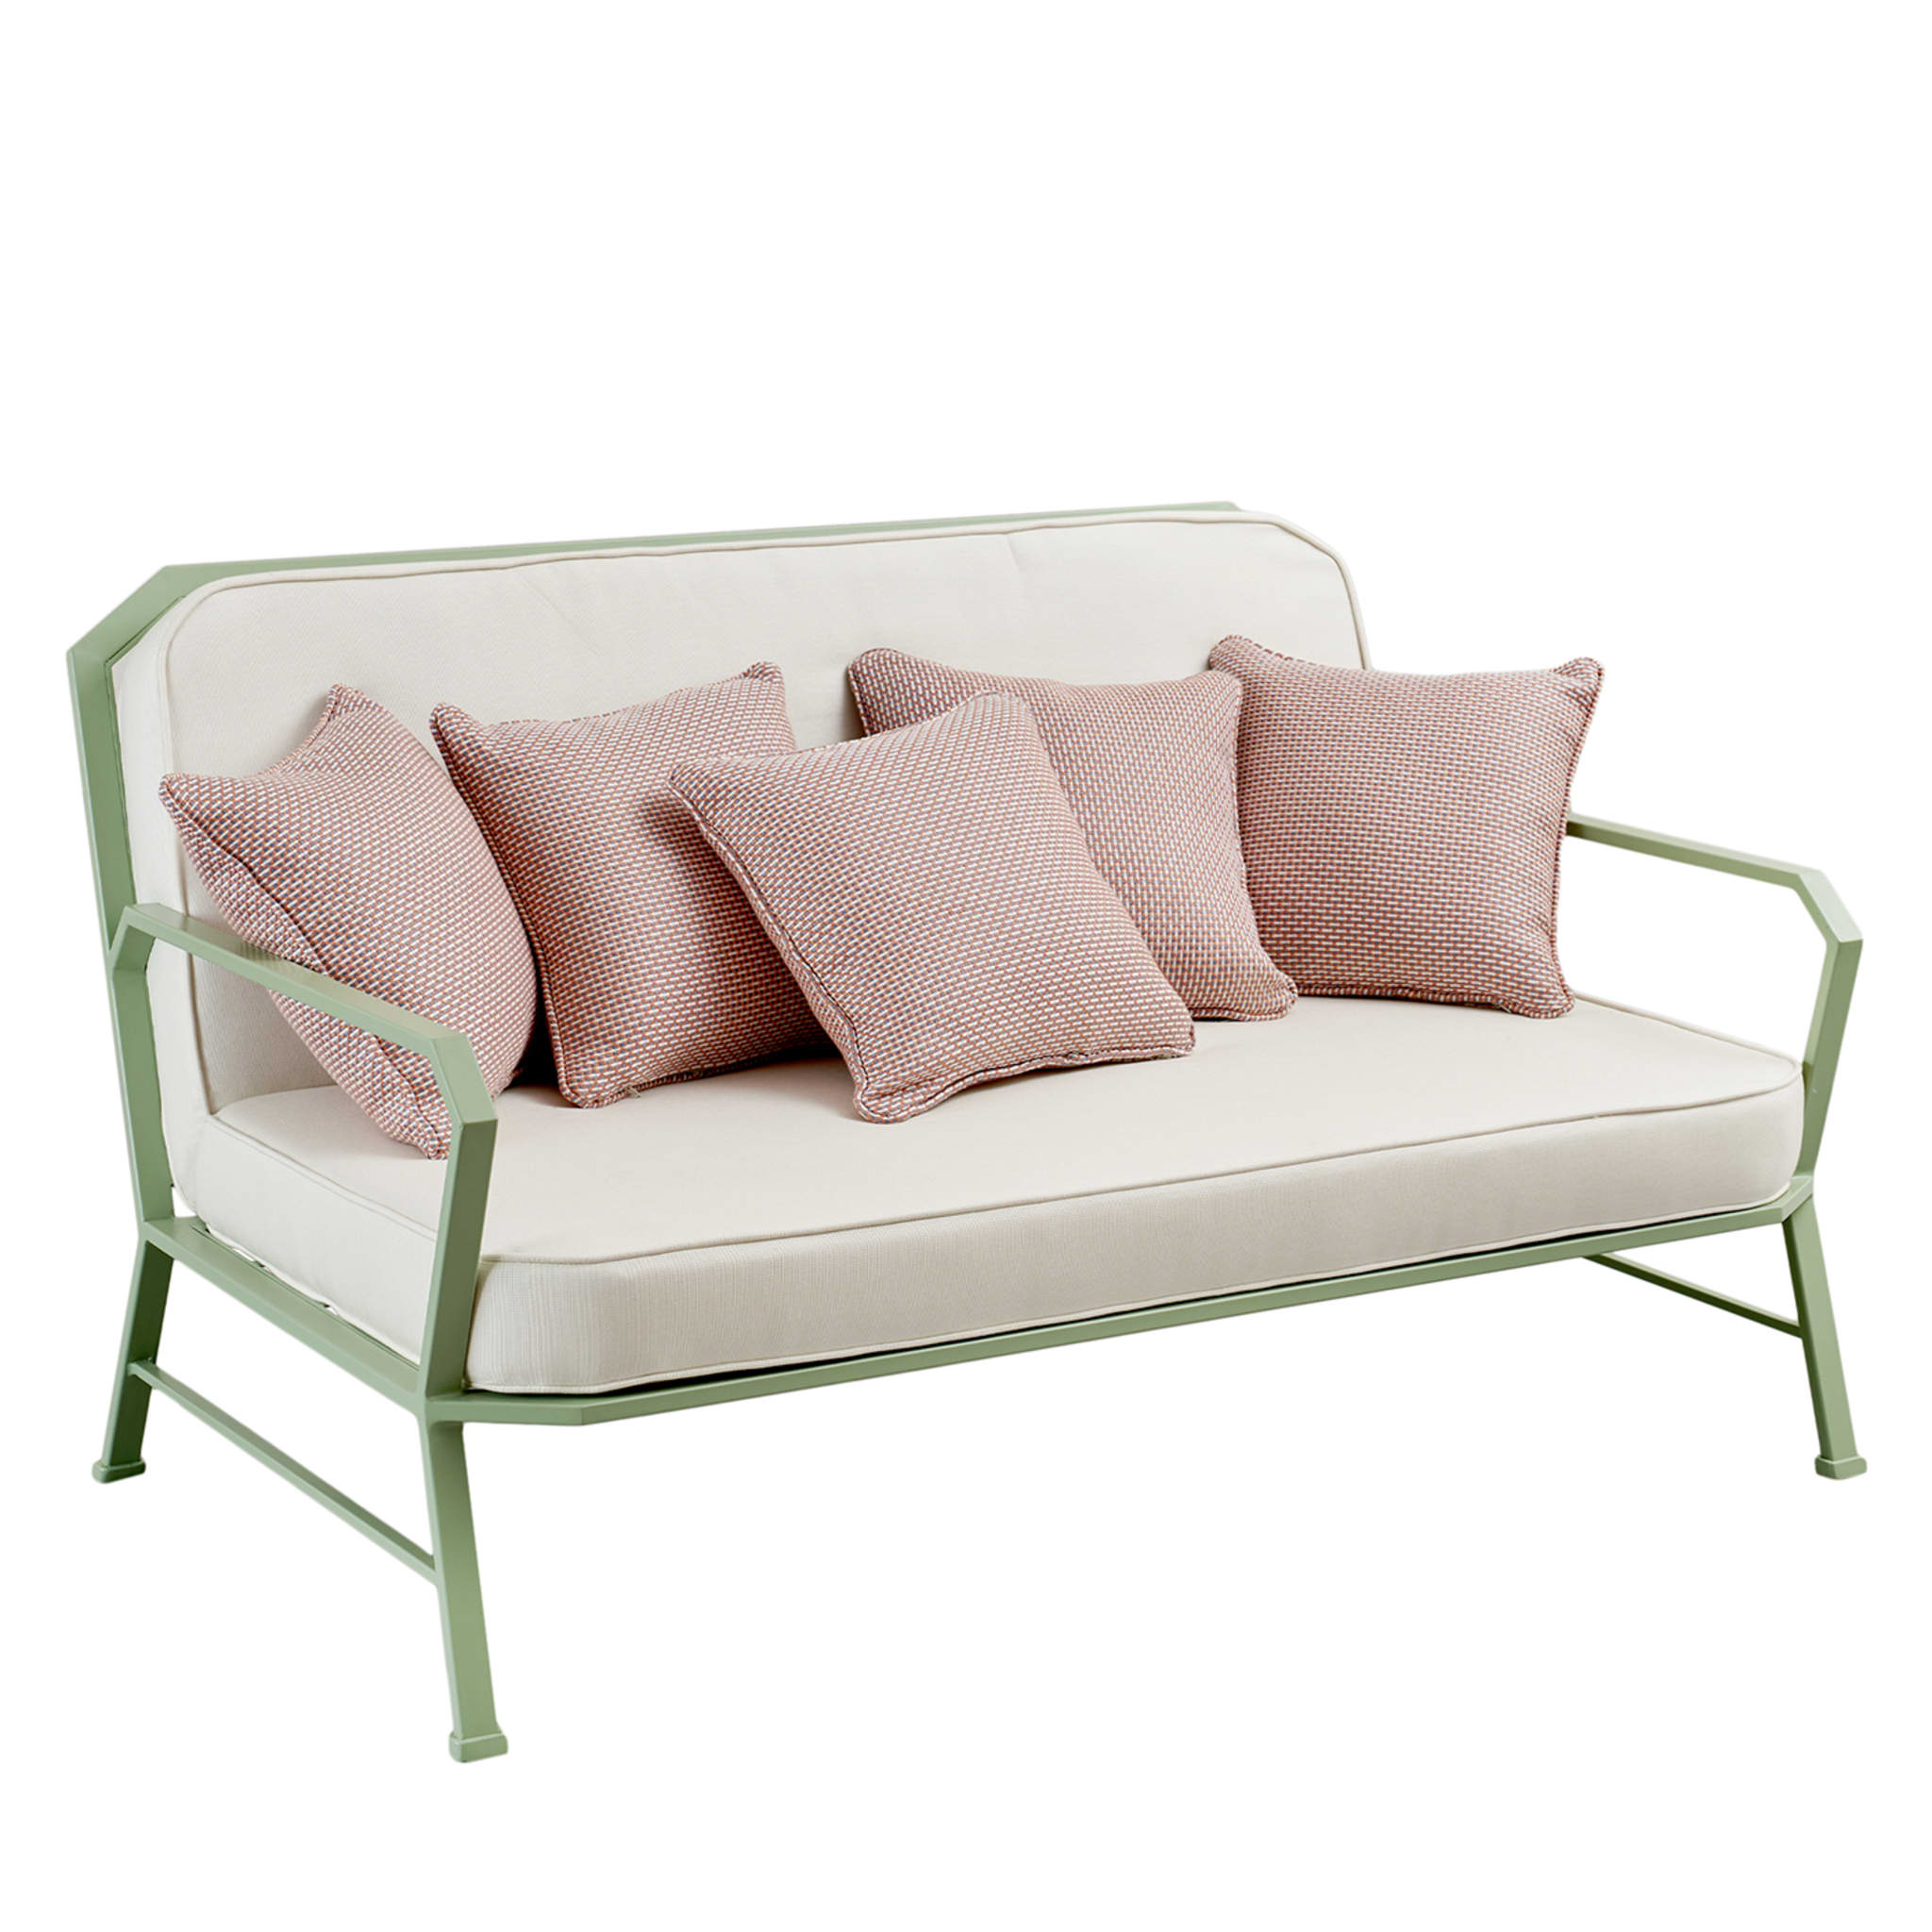 Forest Green & White Sofa by Officina Ciani - Main view